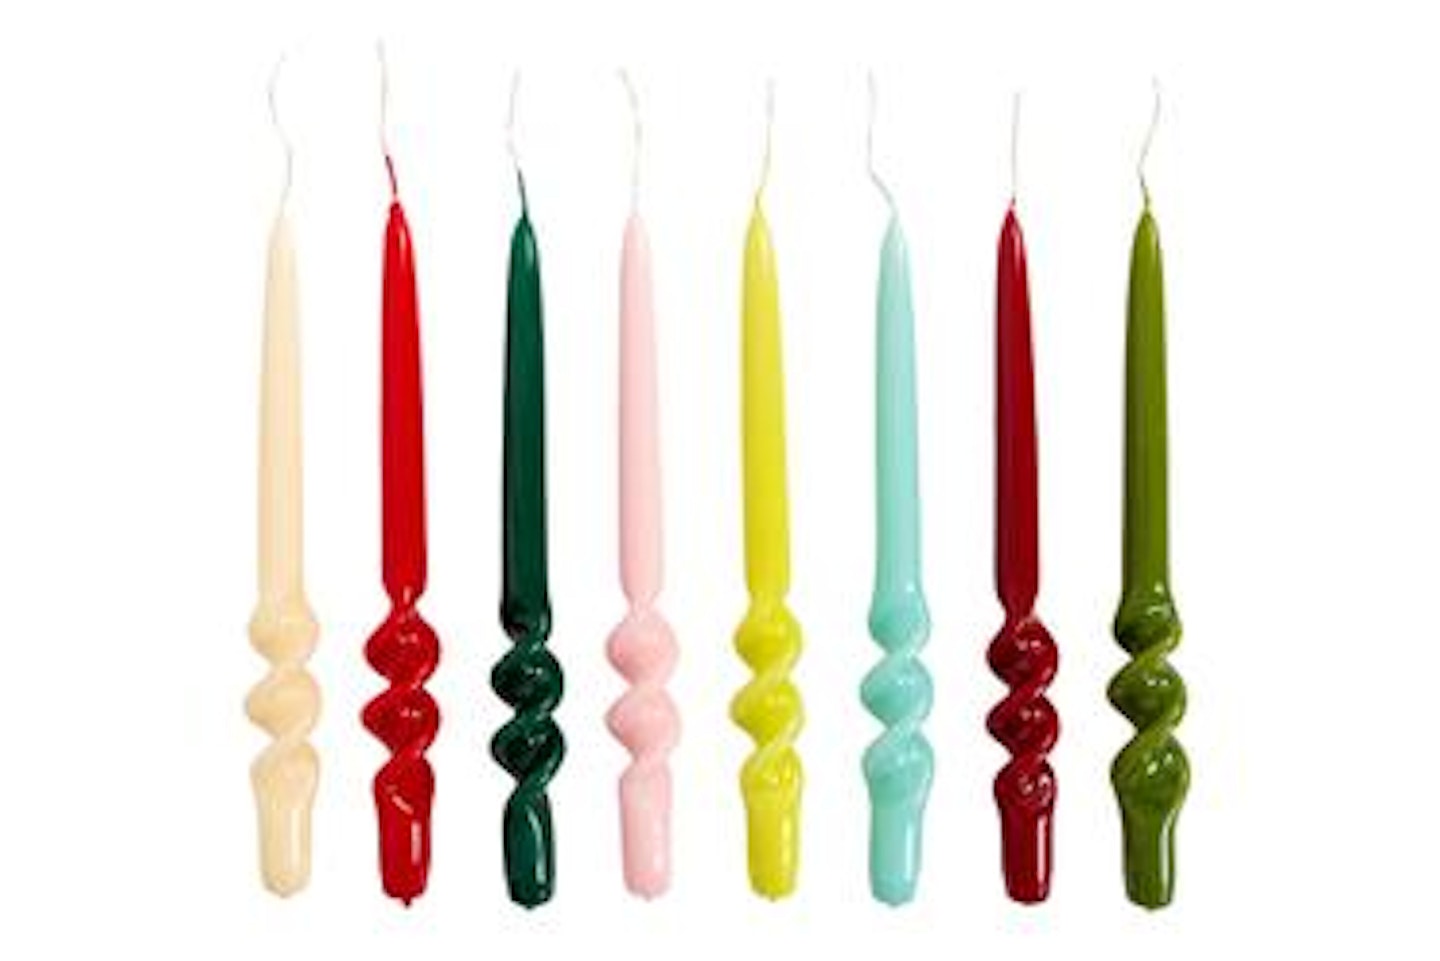 Edition 94, Swirl candles, £6.50